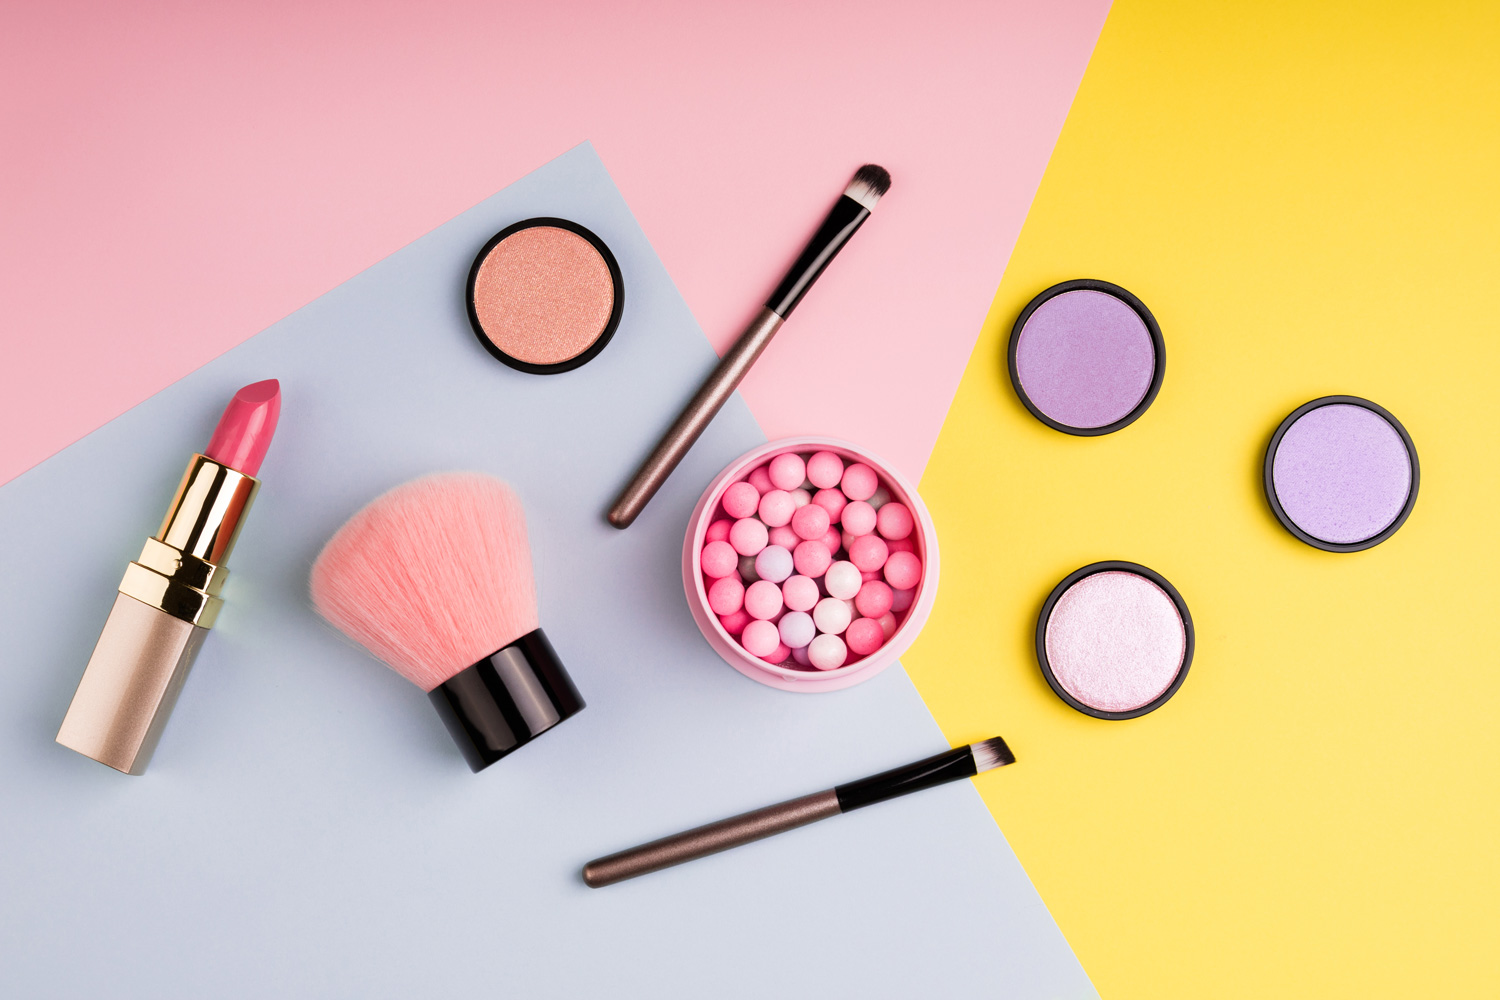 How Does The Wholesale Purchase Of Beauty Products Benefit The Buyer?